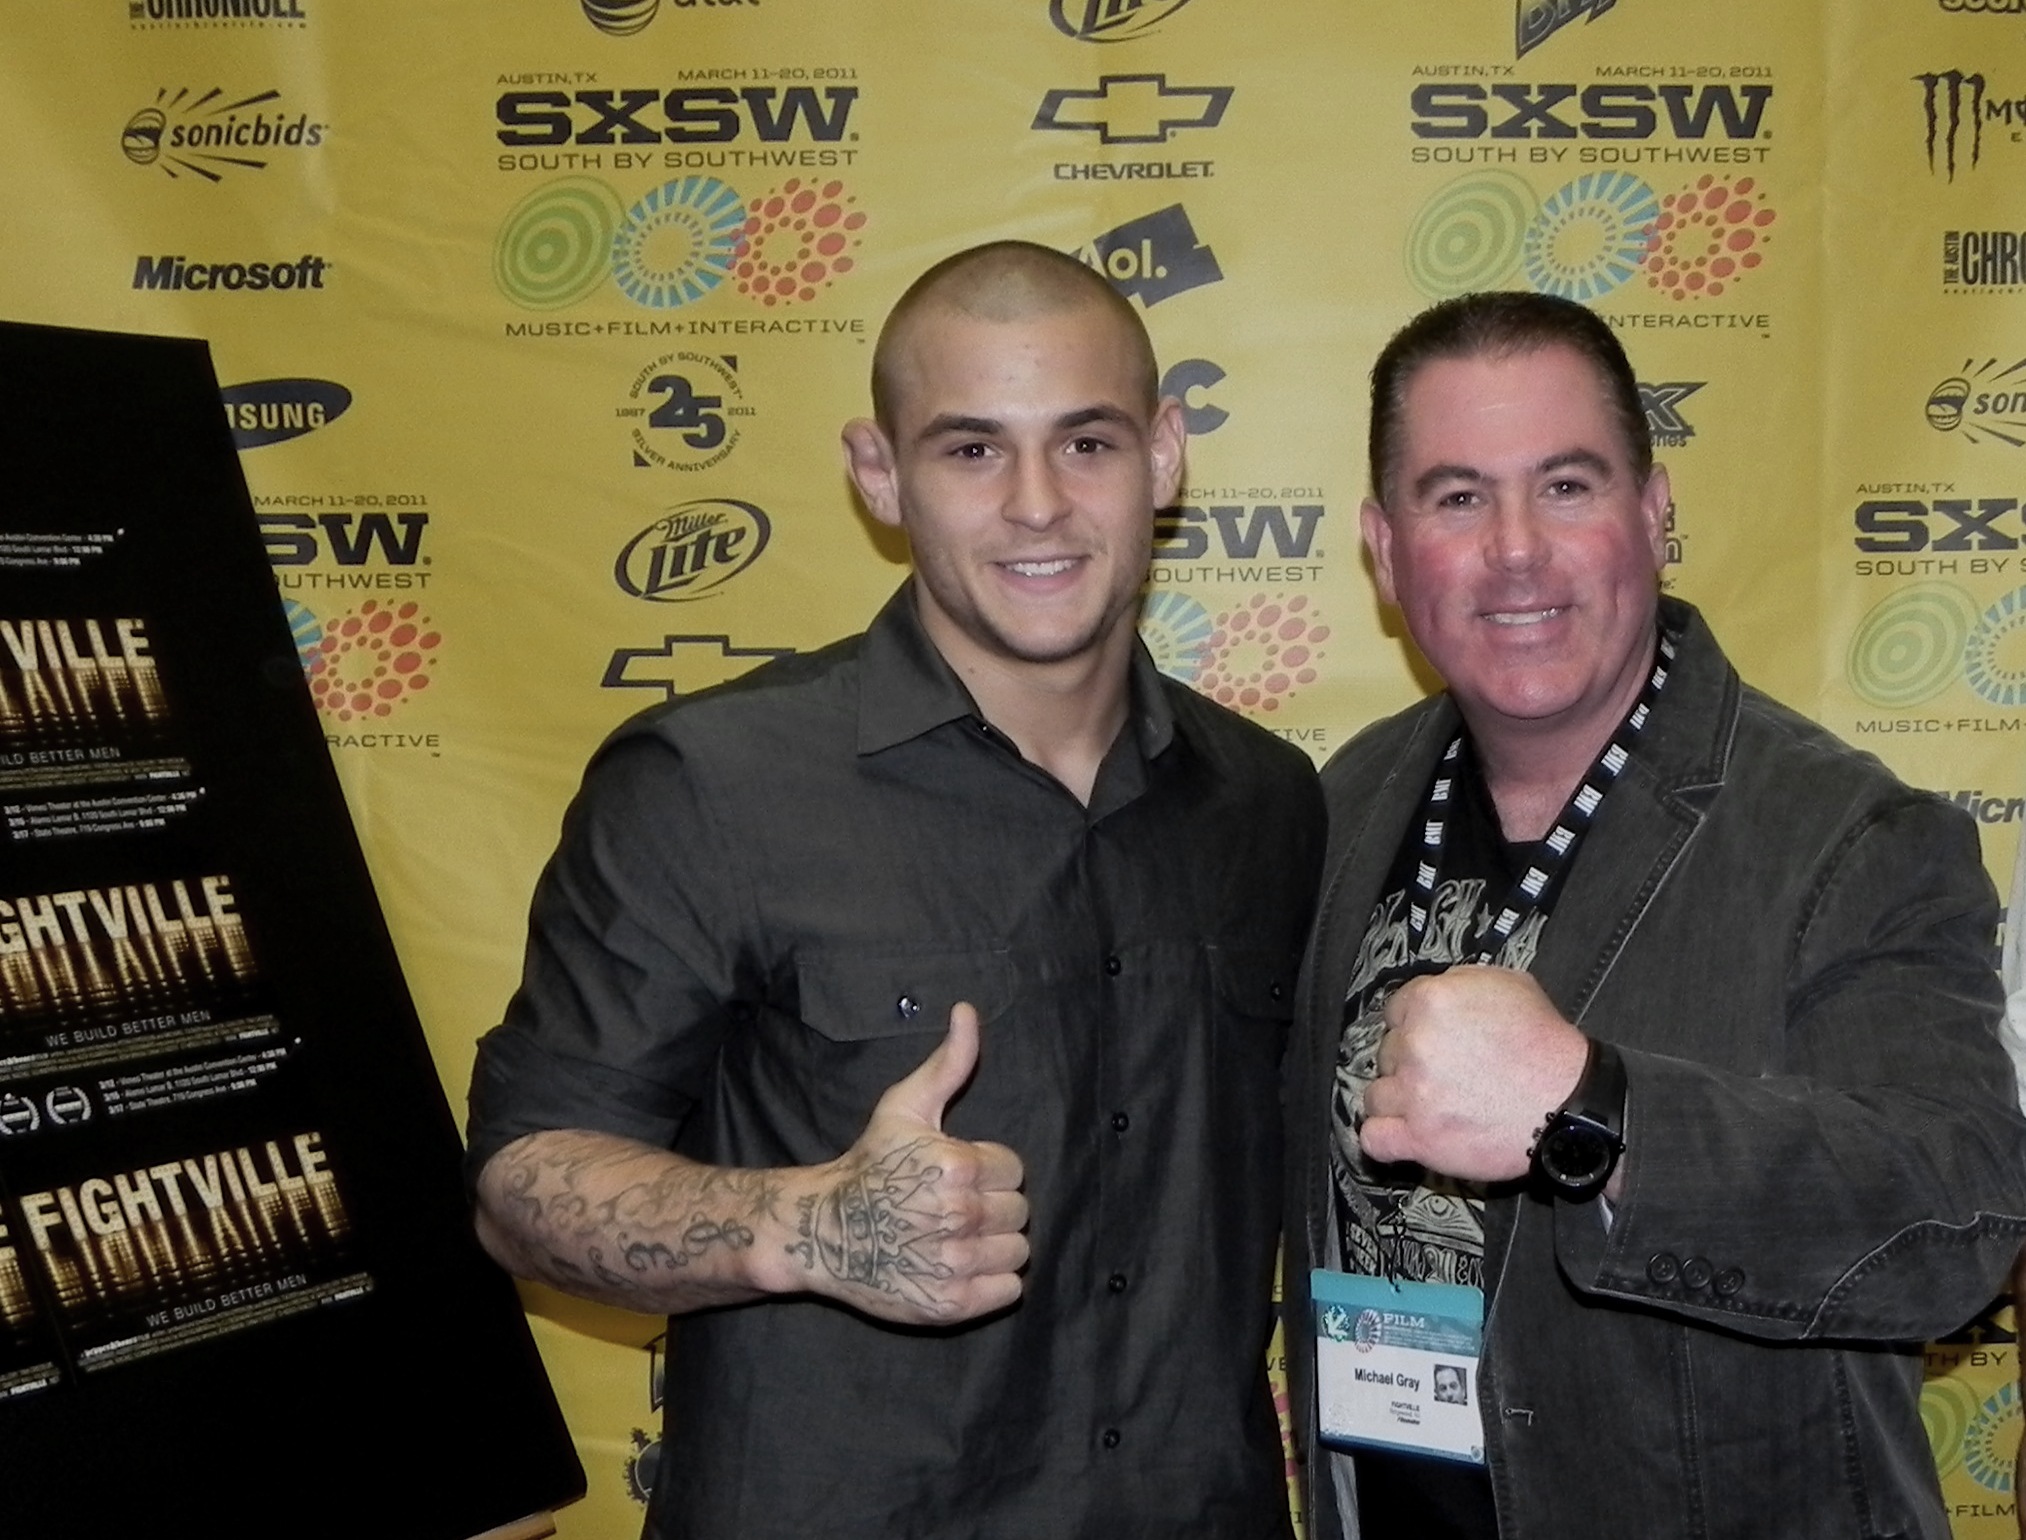 UFC and Fightville star Dustin Poirier with Michael W Gray, producer